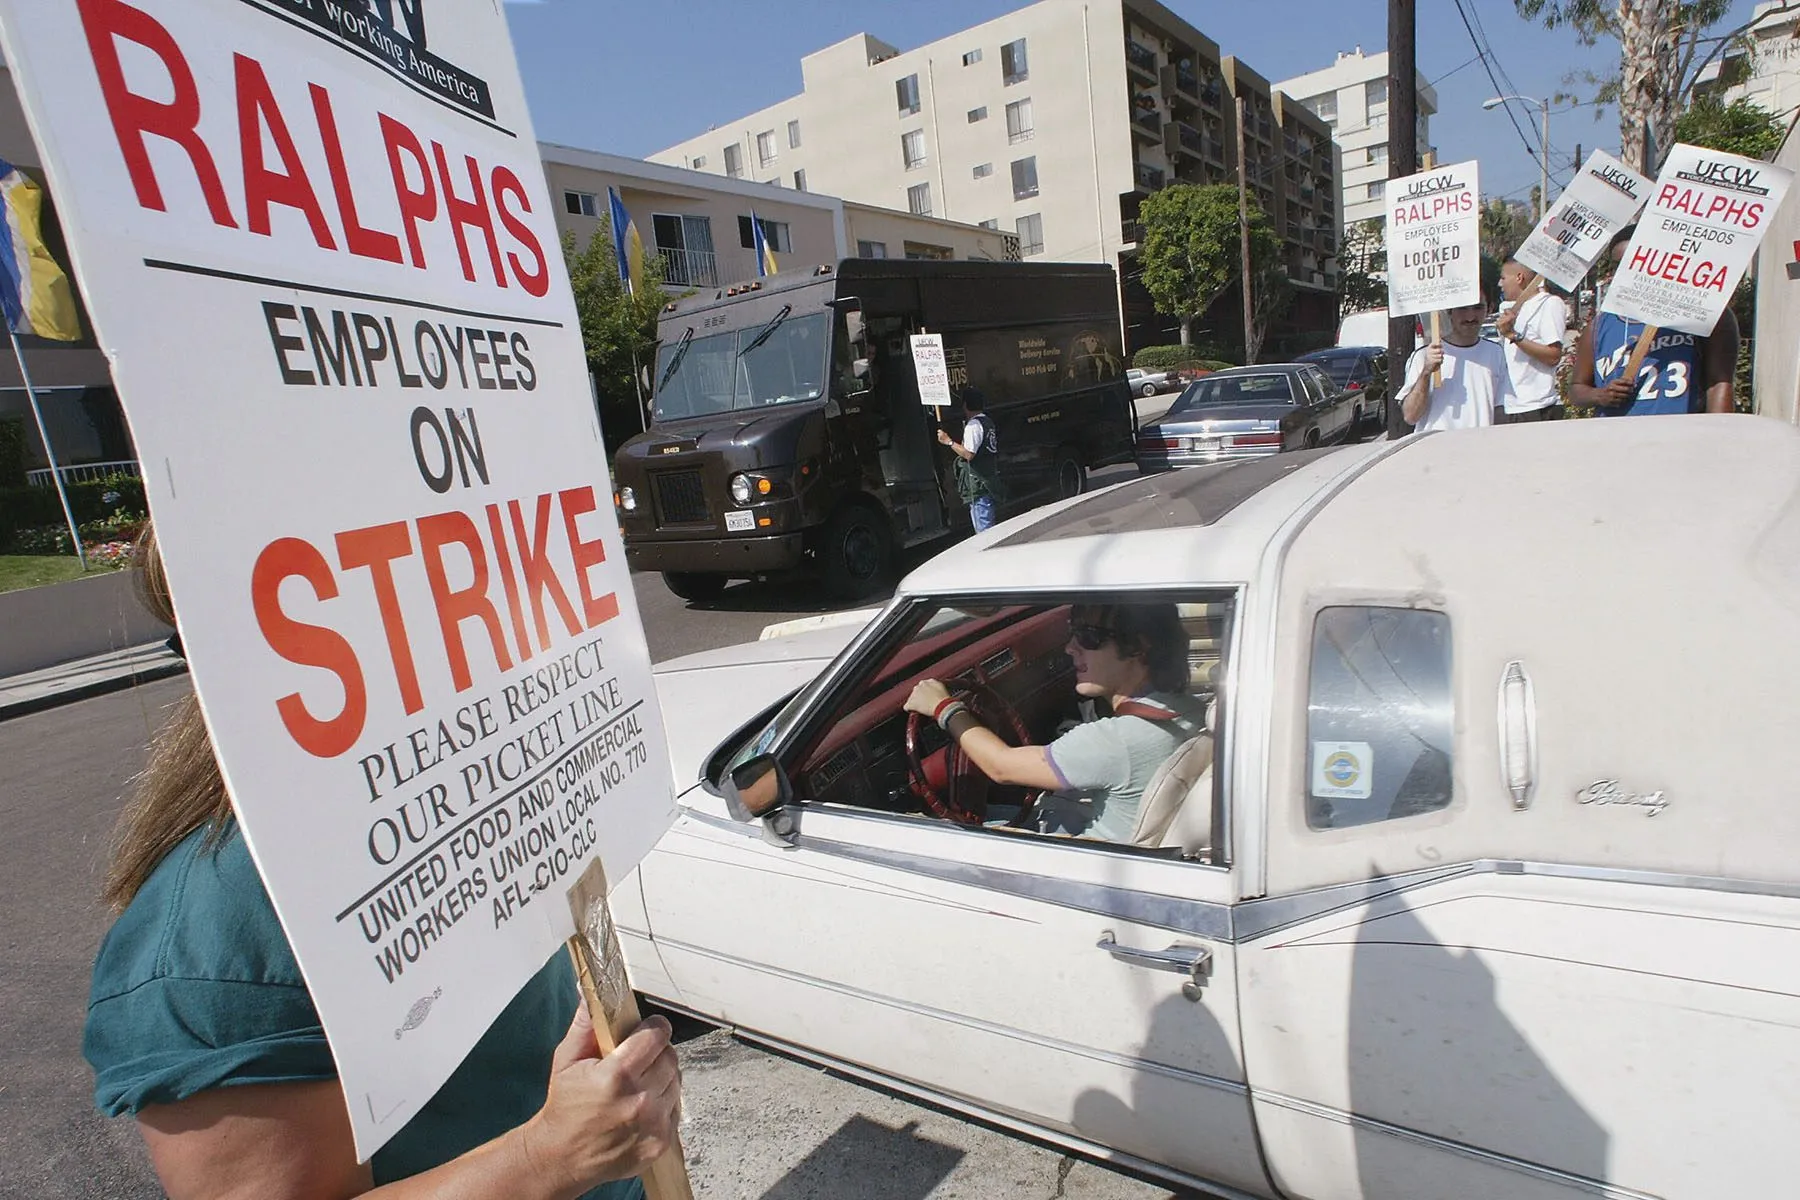 A shopper drives past striking workers as he leaves a Ralphs supermarket. Workers hold picket signs that read "Ralphs Employees on strike, please respect our picket line."